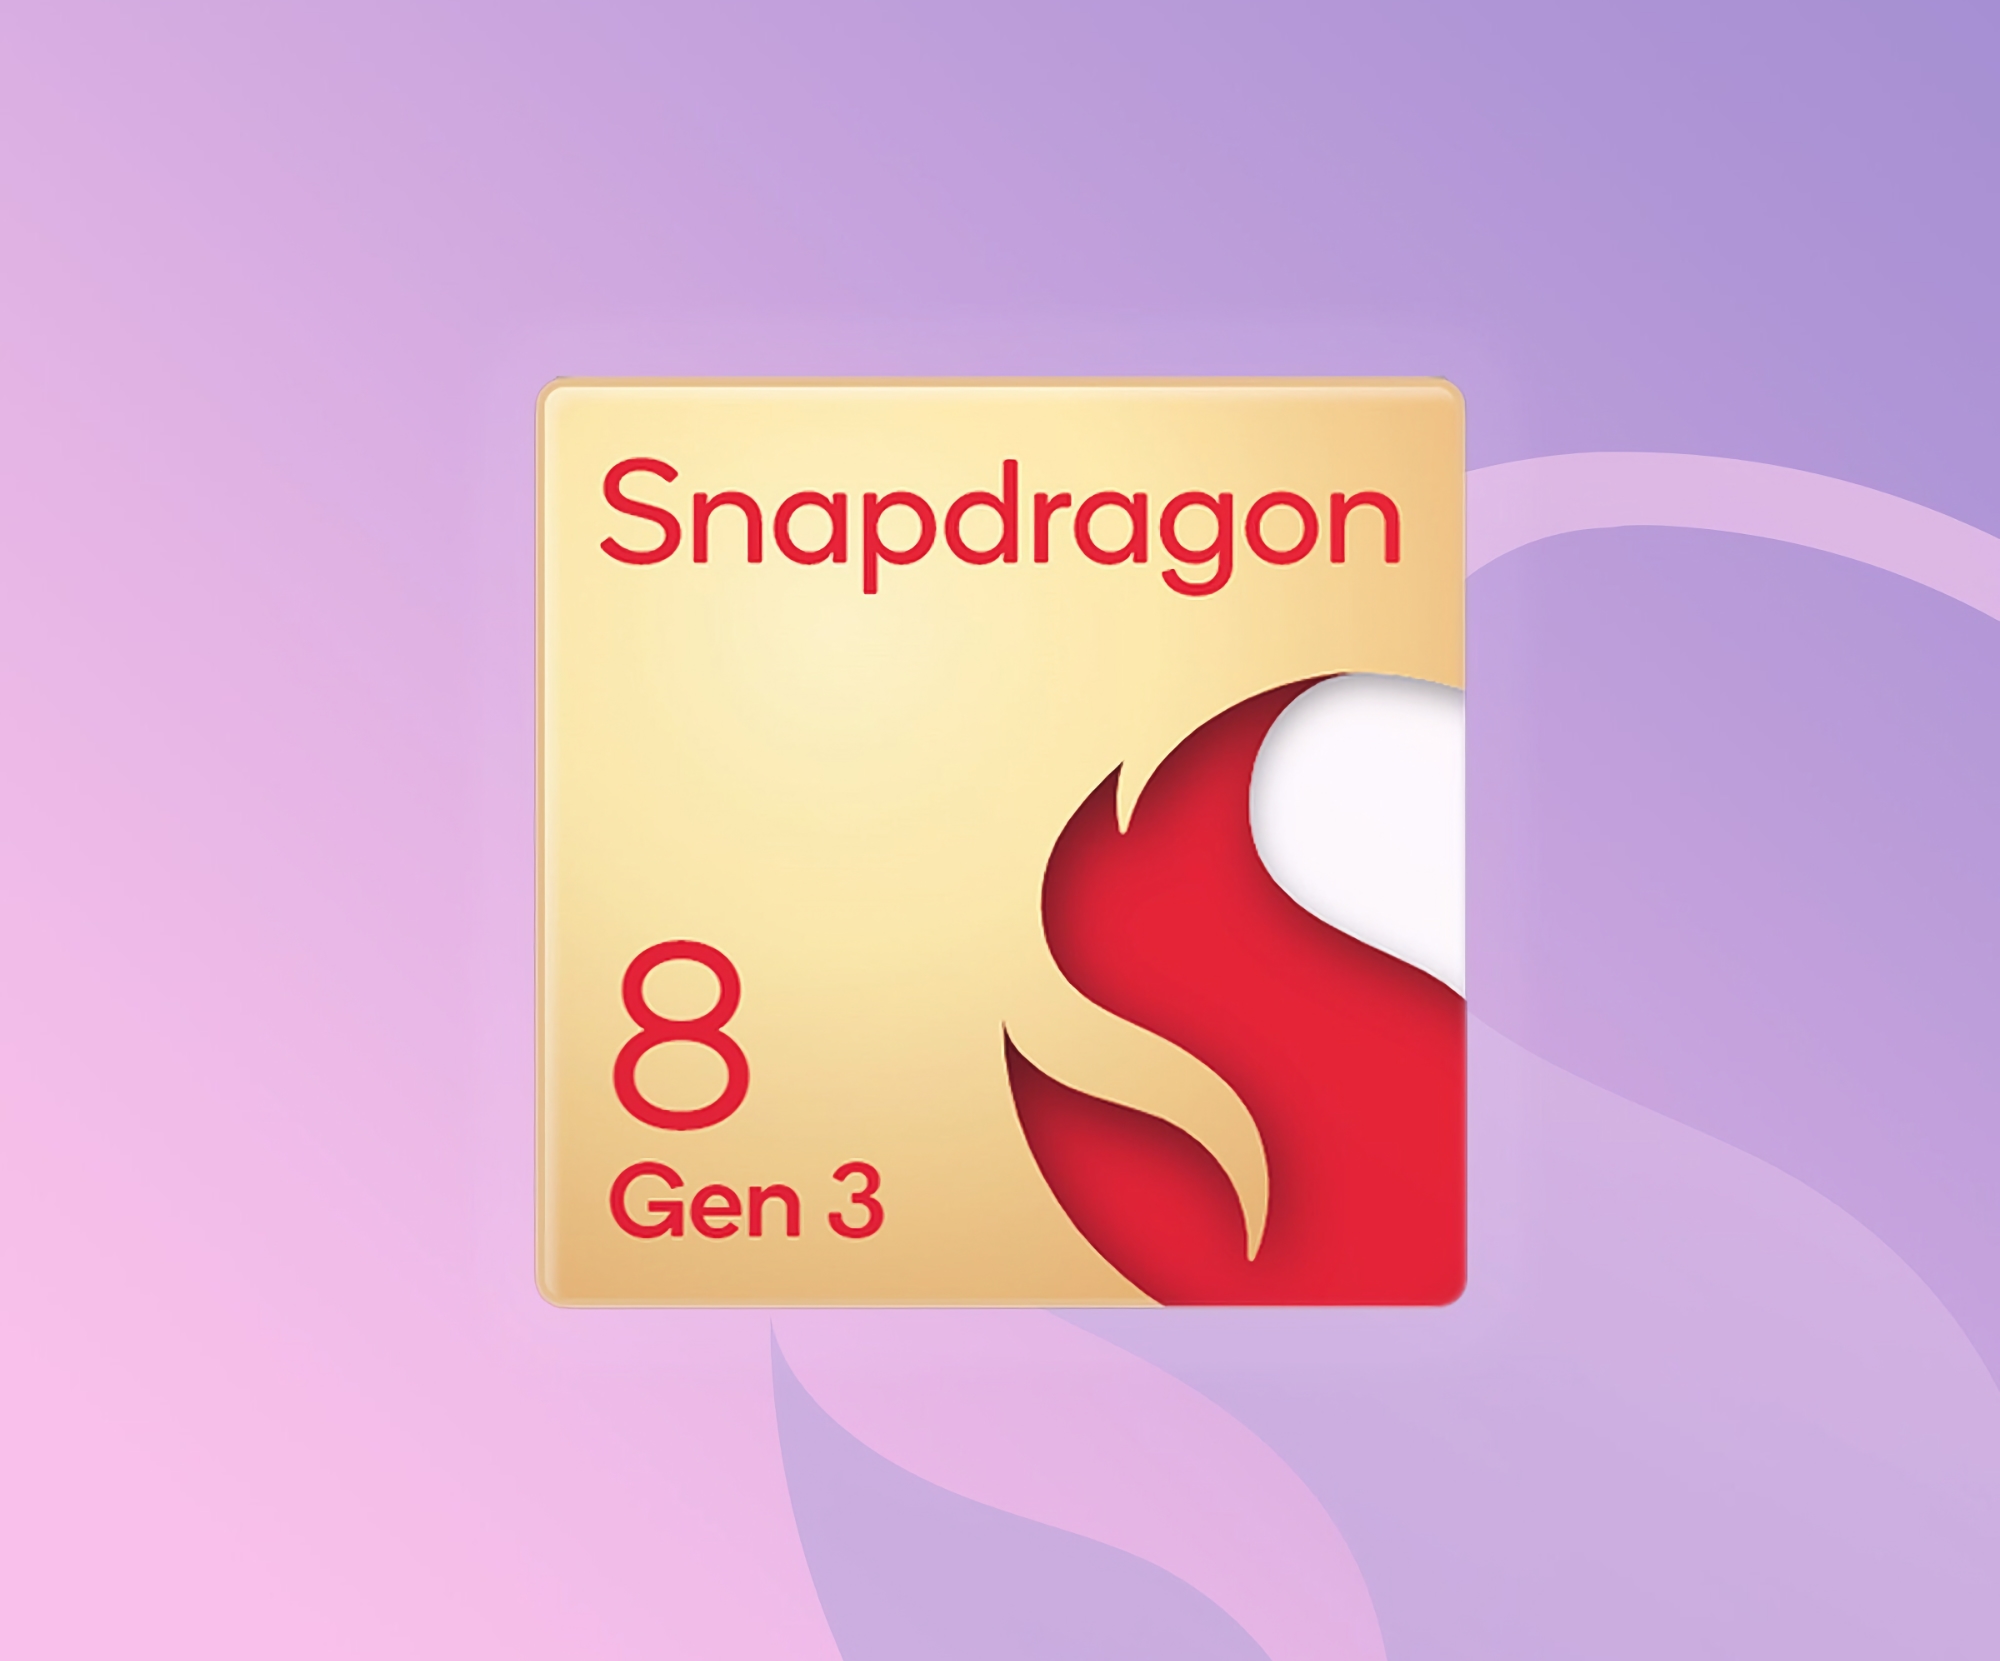 The Nubia Z60 Ultra and Red Magic 9 will also get a Snapdragon 8 Gen 3 processor